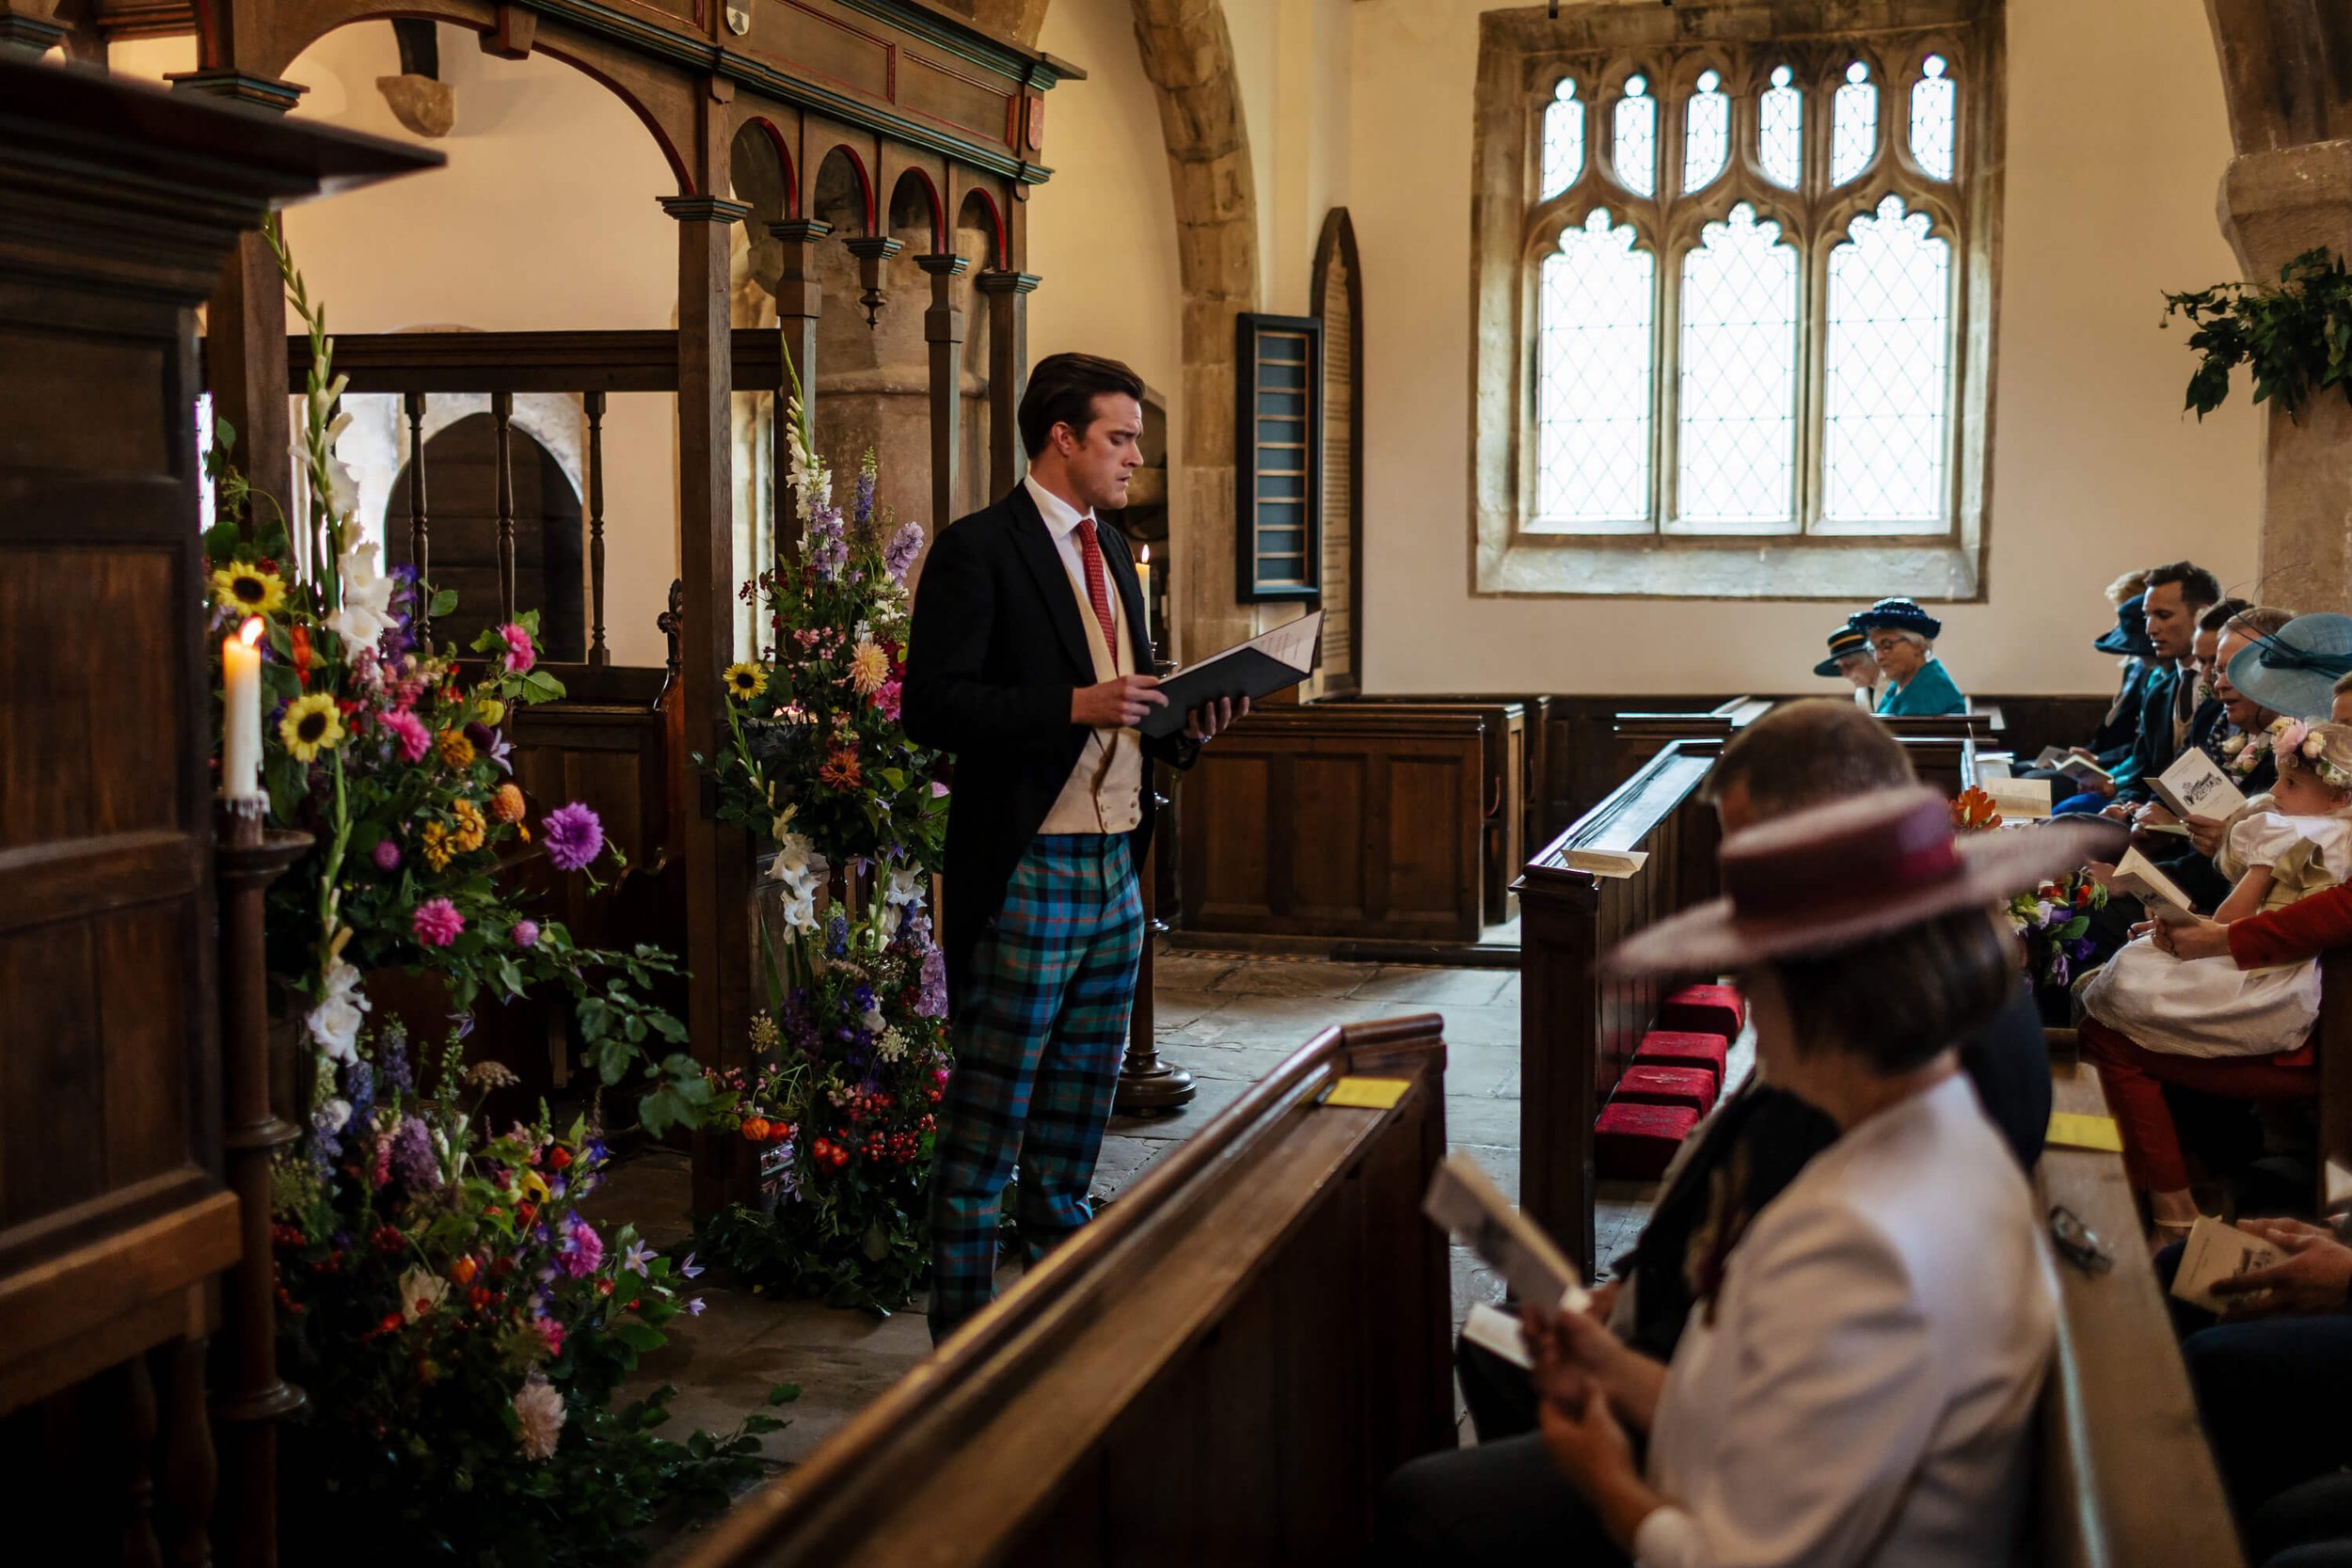 Wedding guest performing a solo hymn at the ceremony